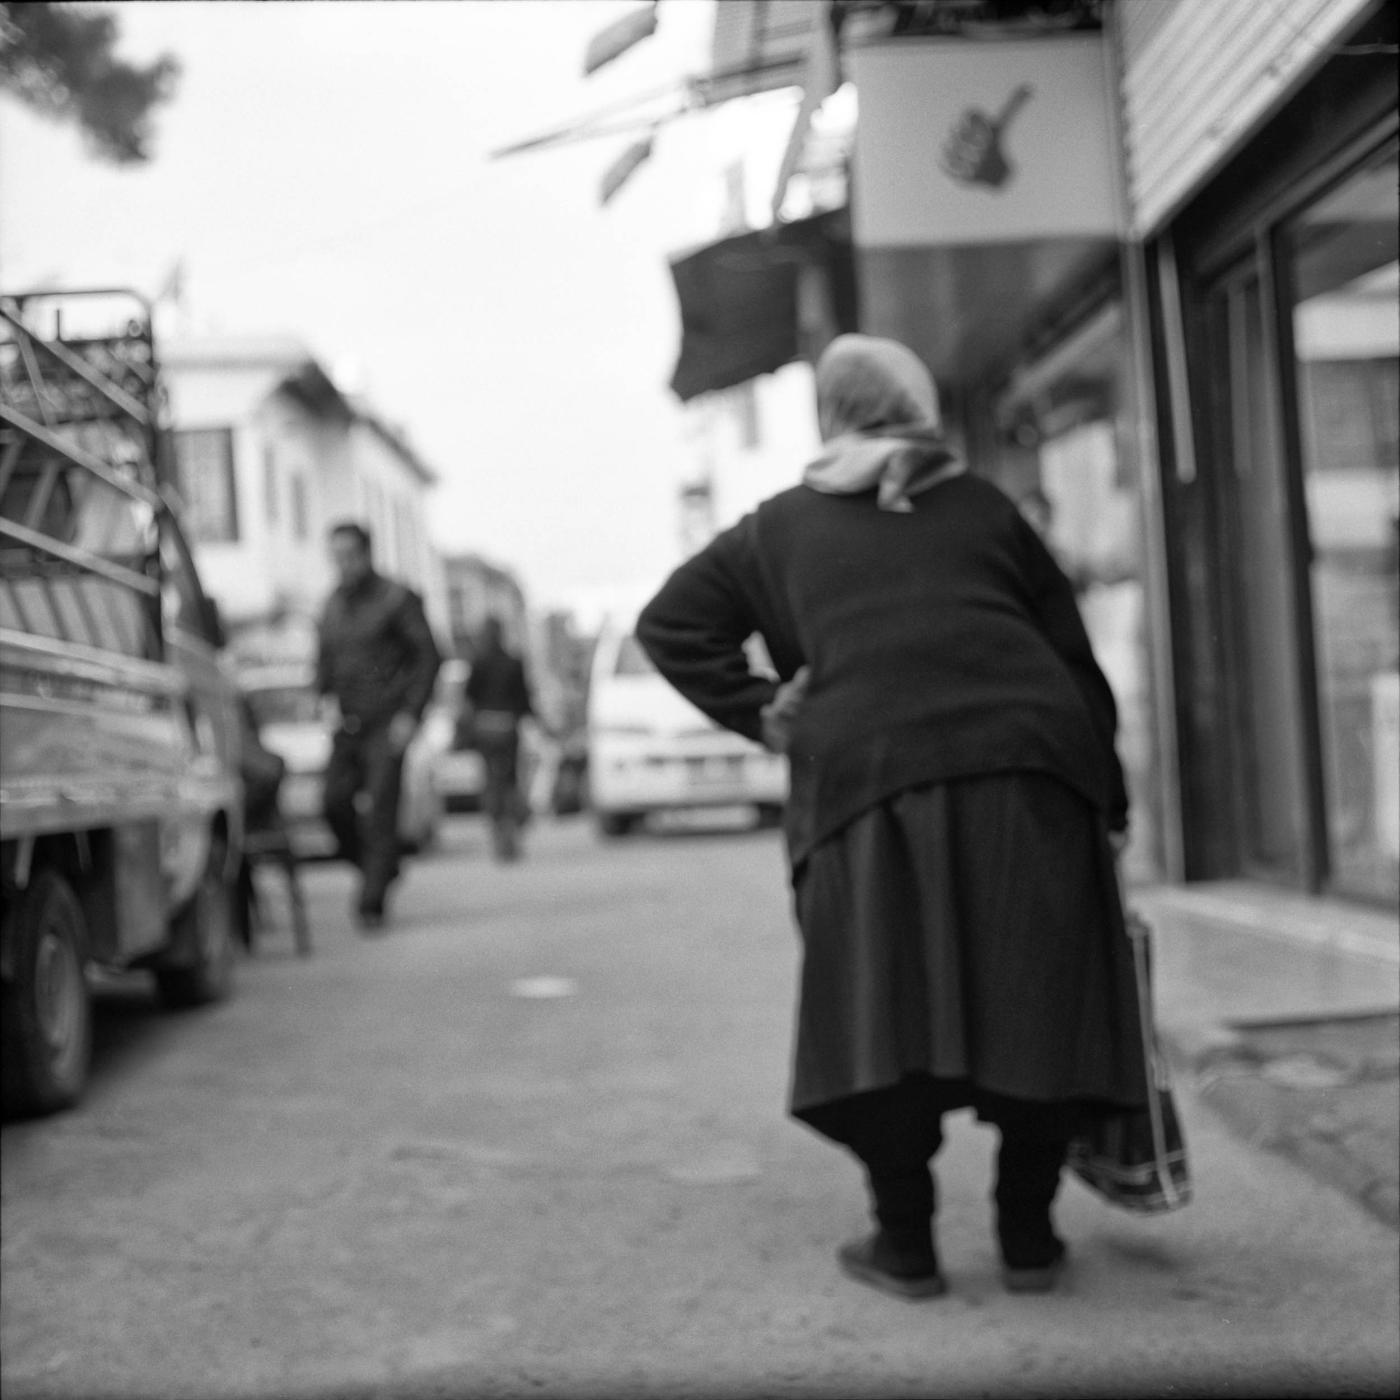 #5, The ancient soul, analog 6x6, Damascus, Syria 2009.